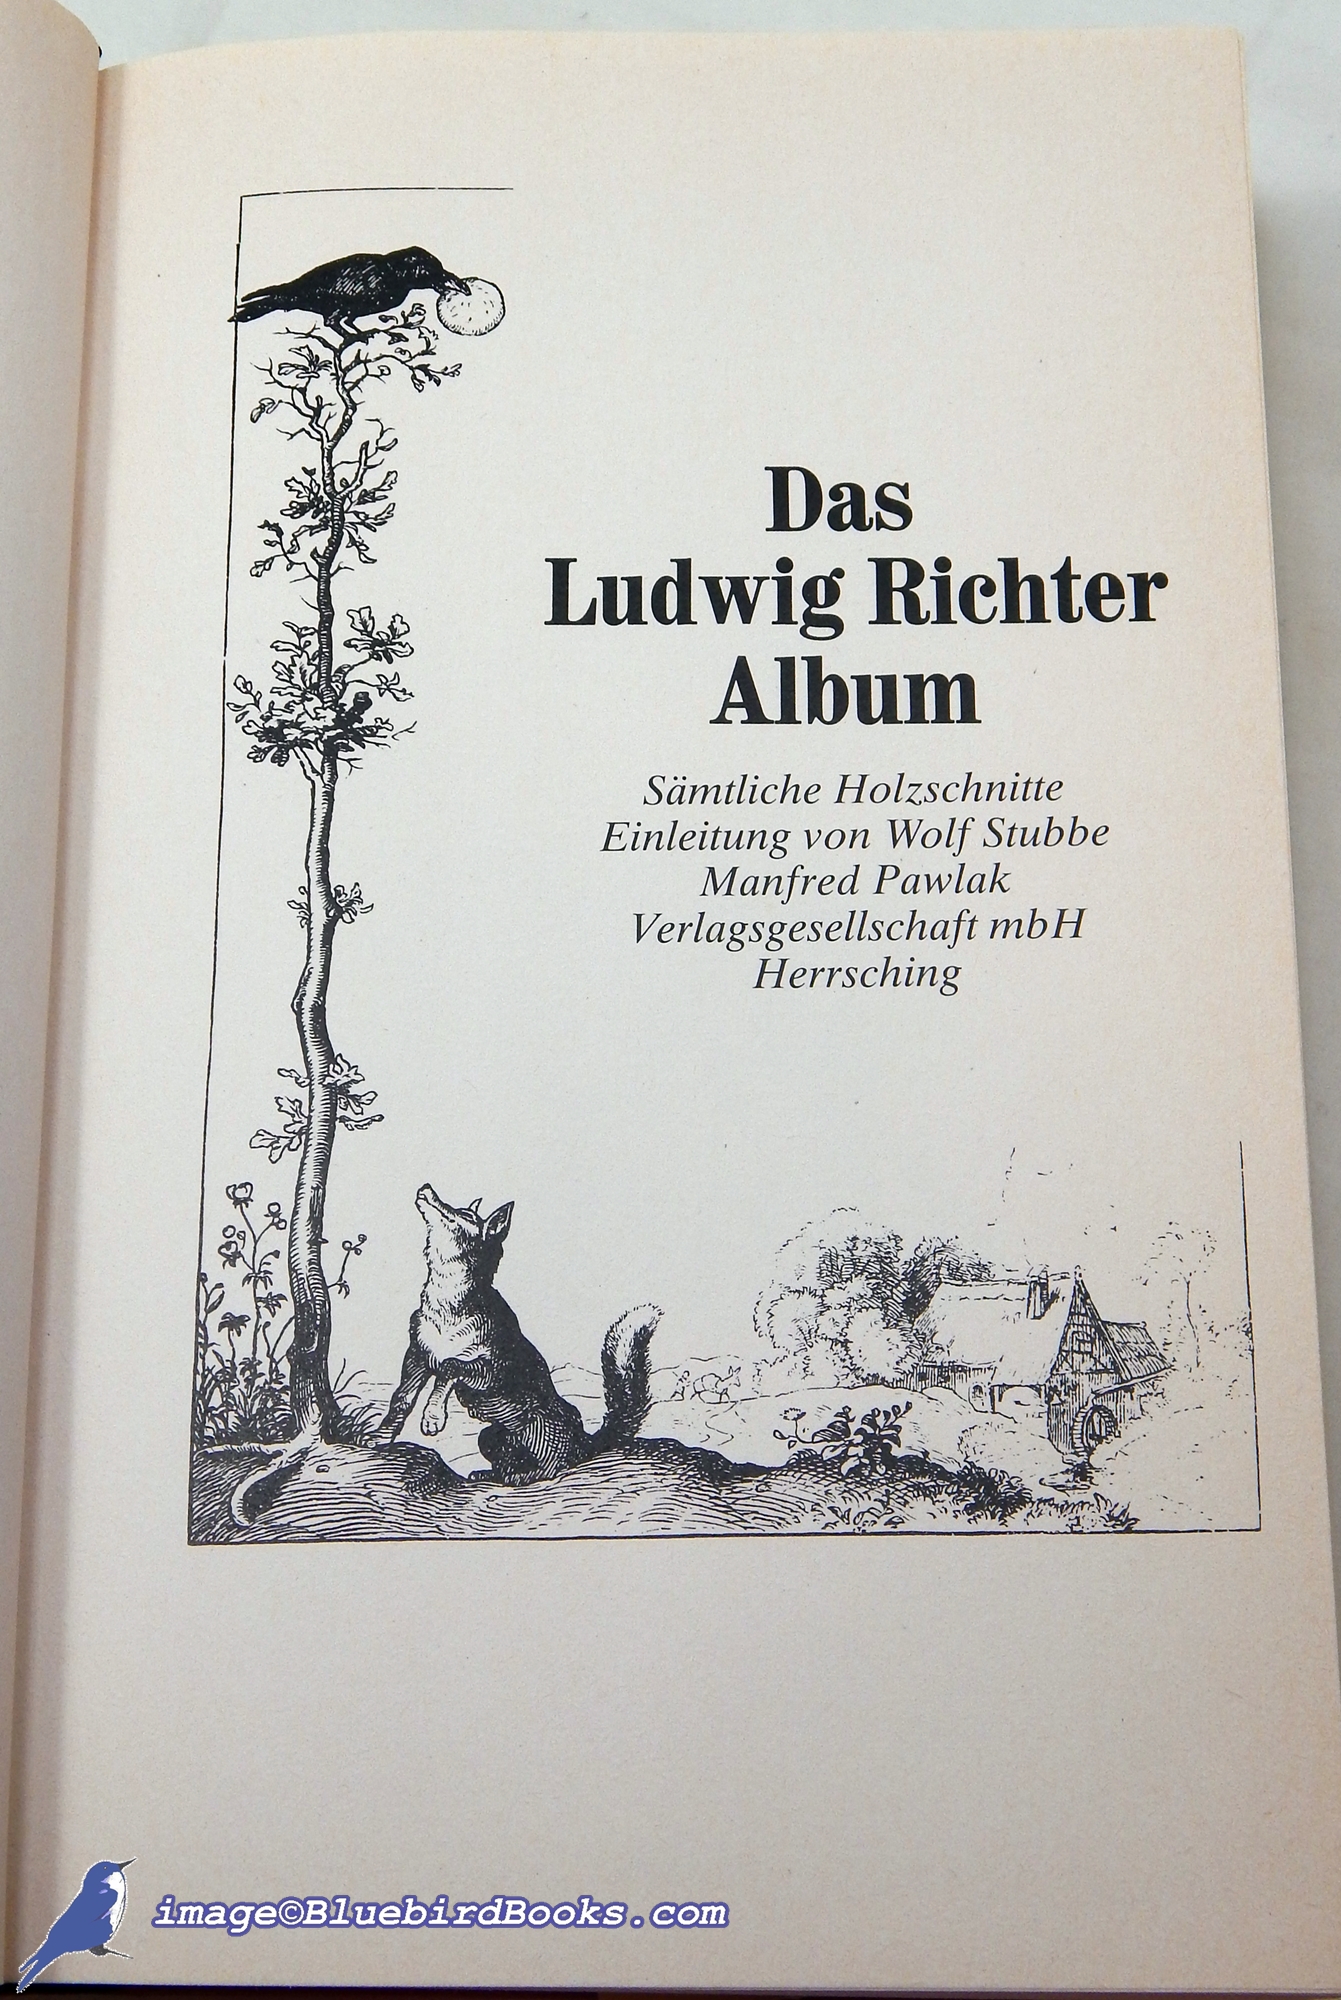 RICHTER, LUDWIG; STUBBE, WOLF (EDITOR) - Das Ludwig Richter Album: Smtliche Holzschnitte, Volumes 1 and 2 (the Ludwig Richter Album: All Woodcuts)